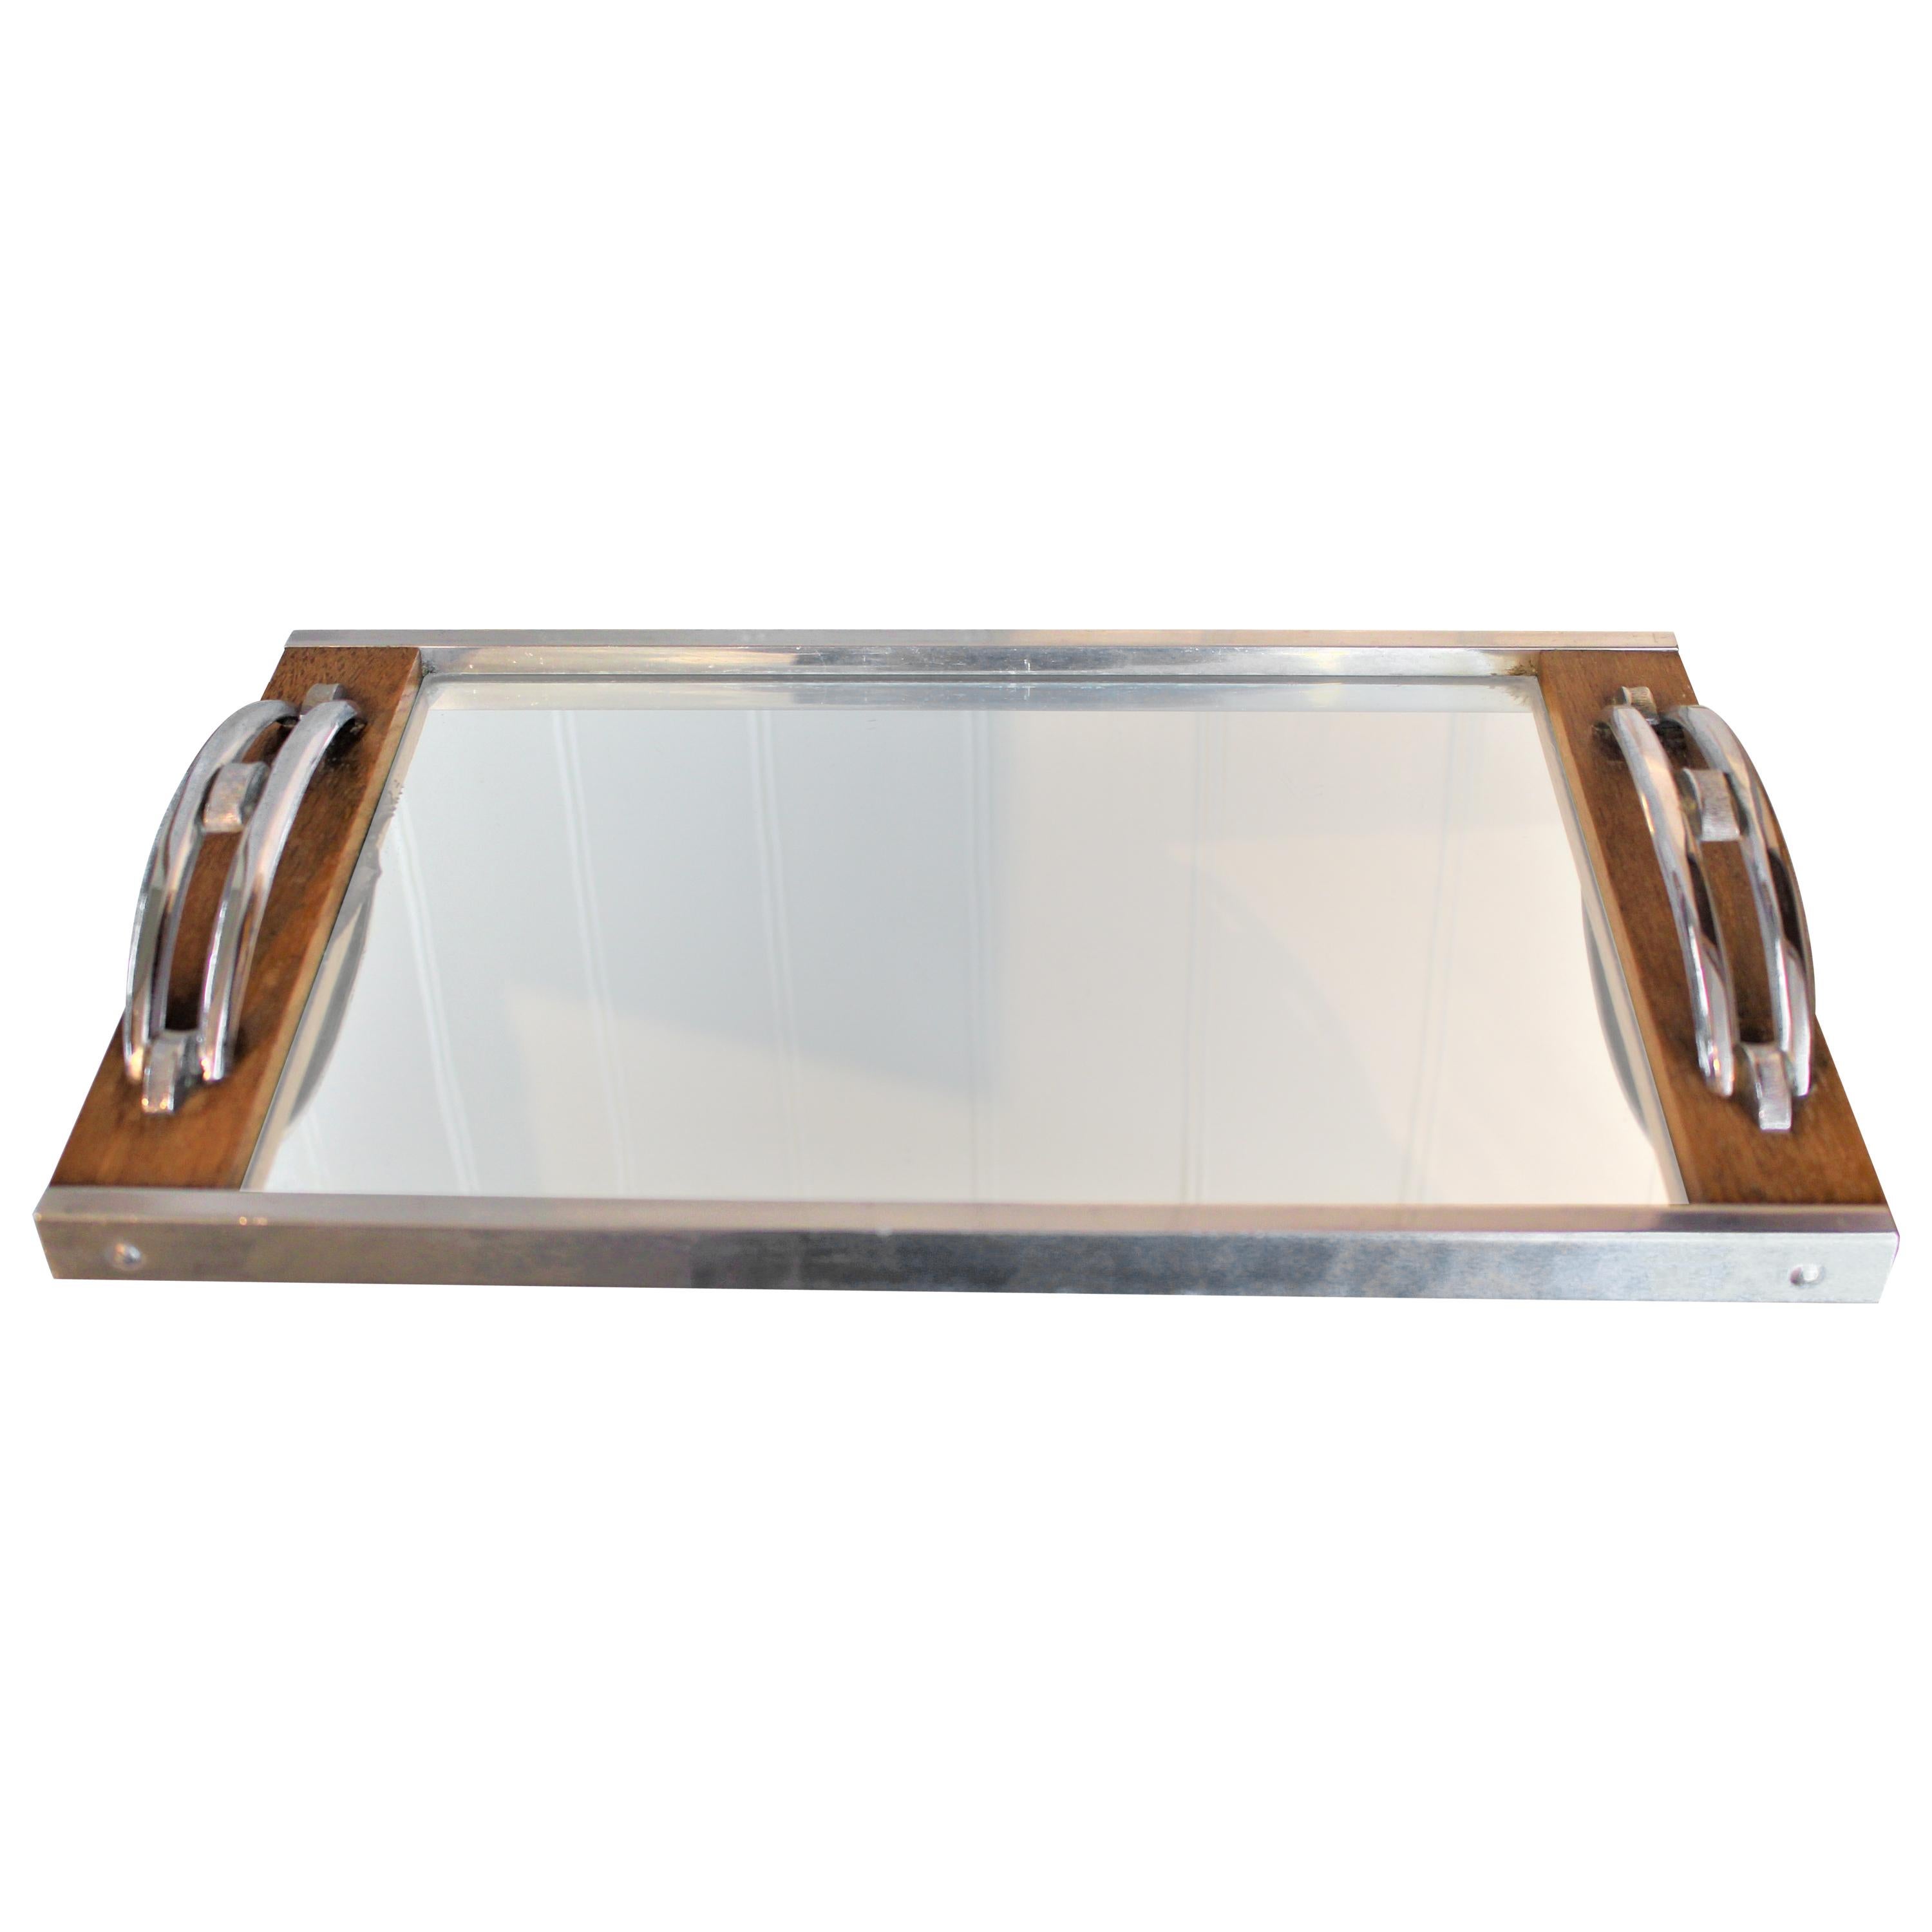 Antique Art Deco 1930s French Chrome Mirrored Cocktail Drink Bar Serving Tray For Sale